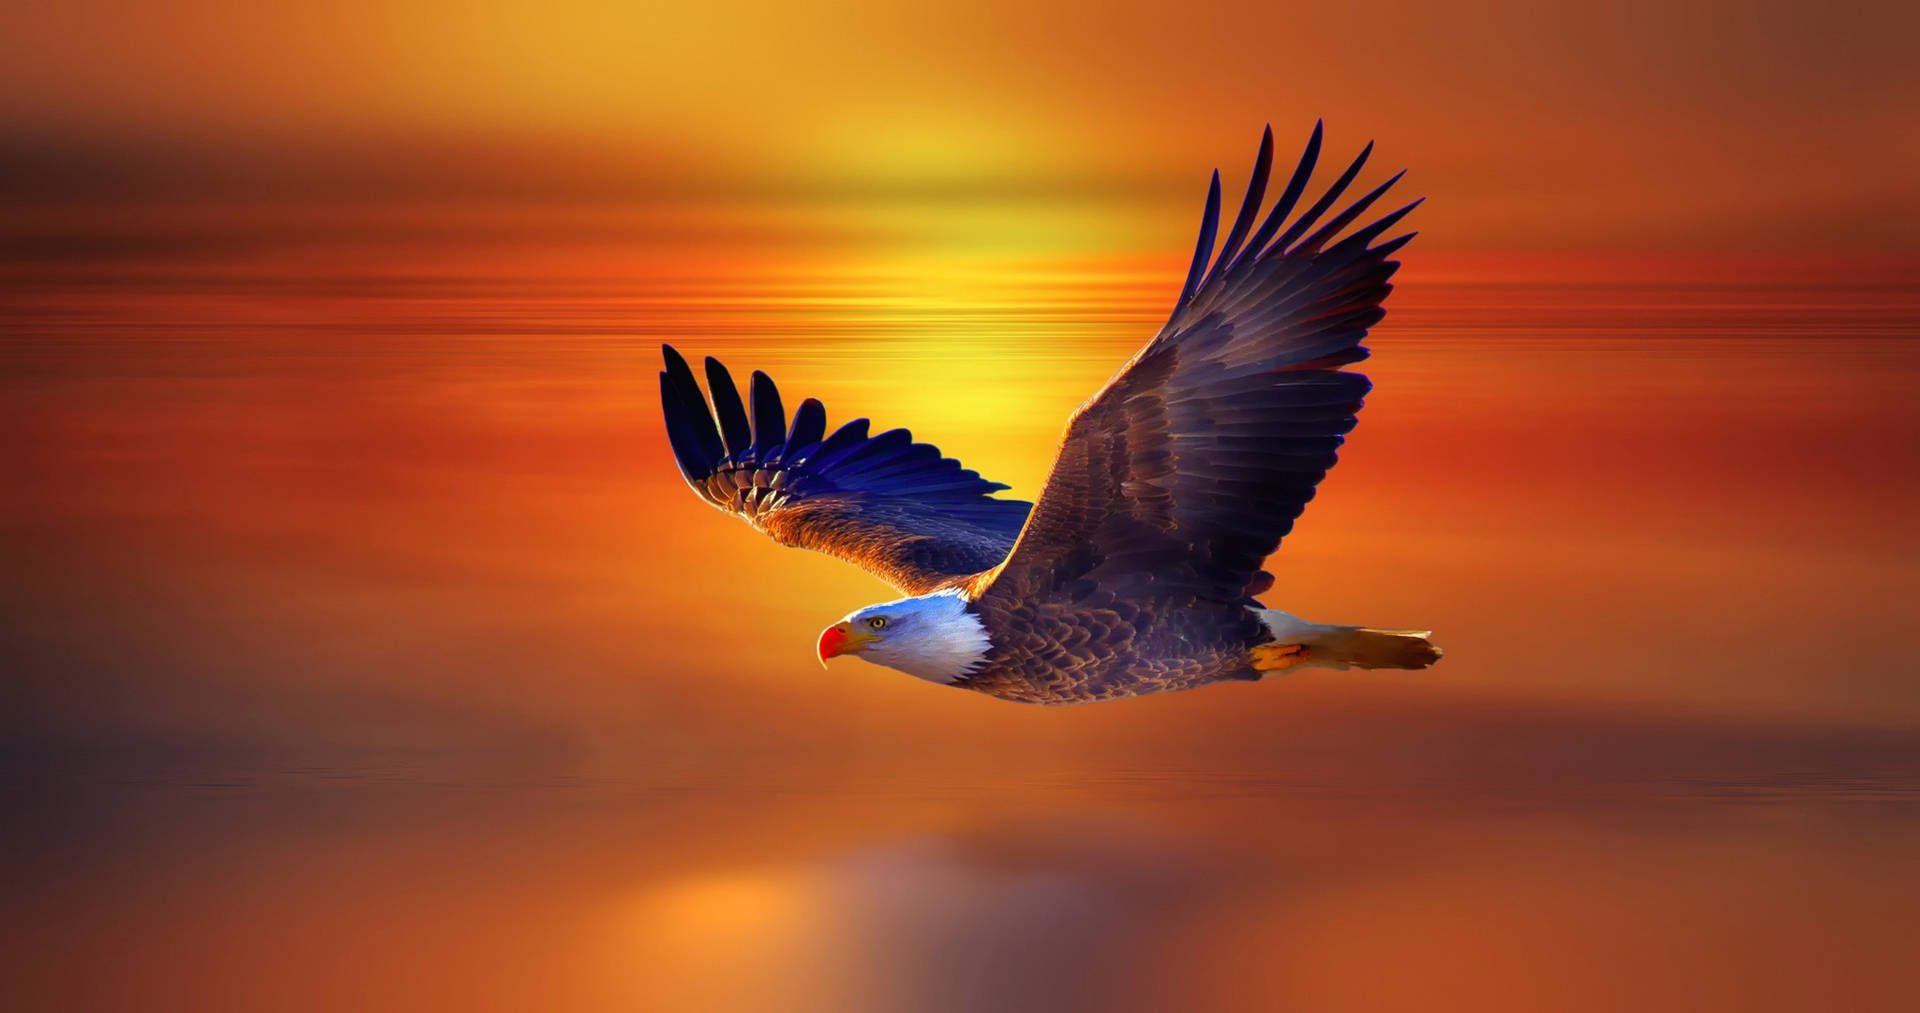 Aguila Flying Over The Sunset Seas Wallpaper